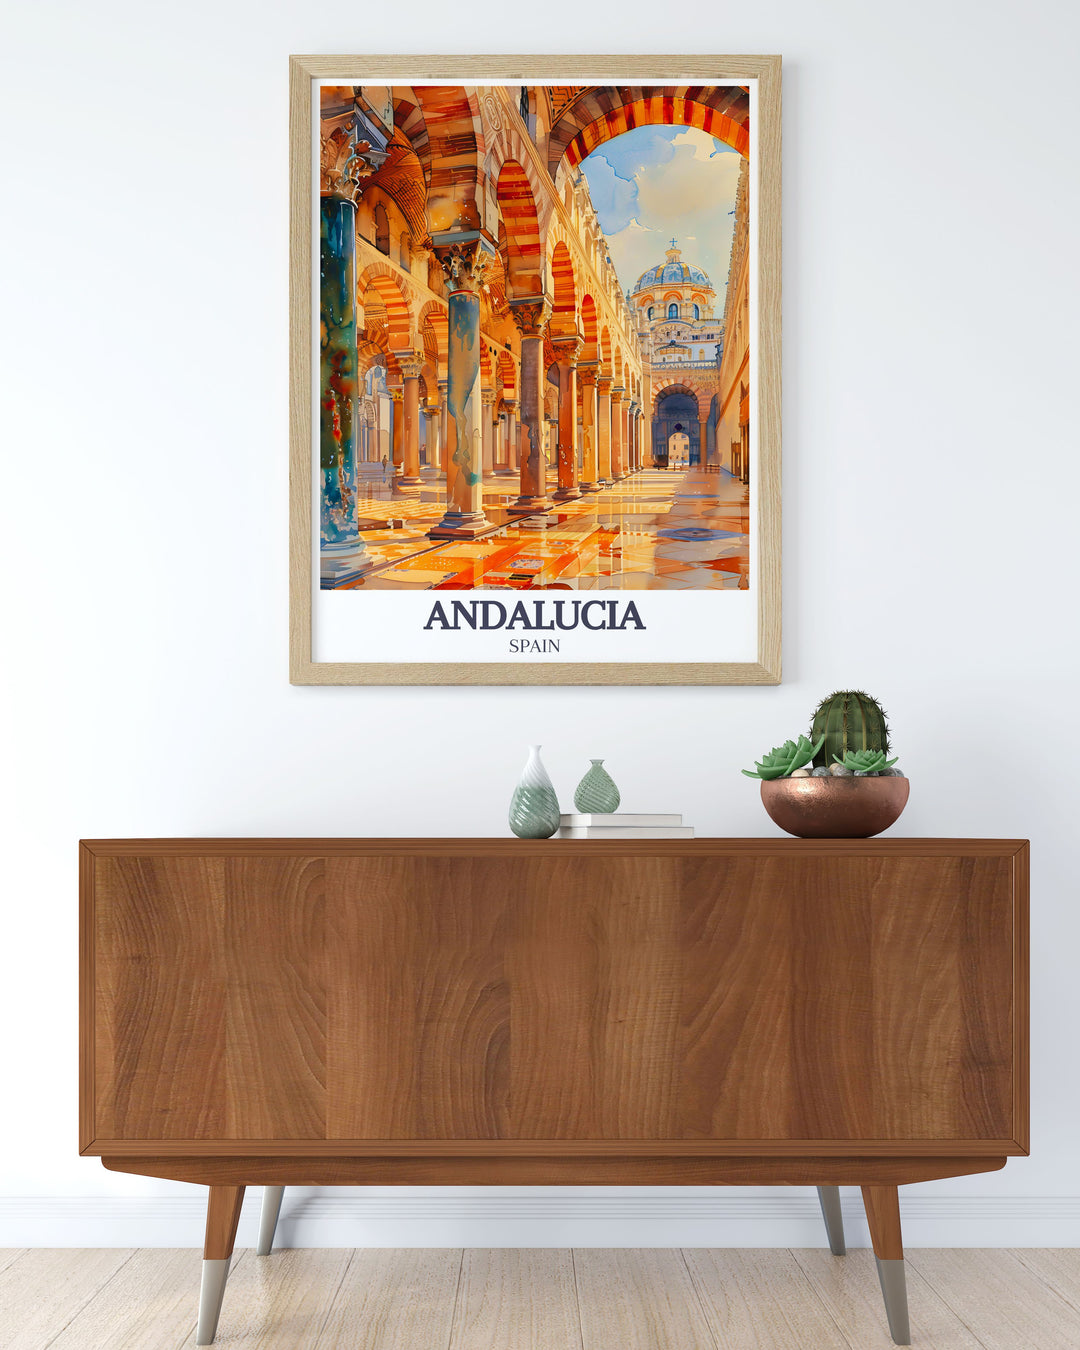 The grandeur of the Mezquita Catedral and the Torre del Alminar is depicted in this travel poster, showcasing Andalucias rich cultural heritage and architectural marvels.